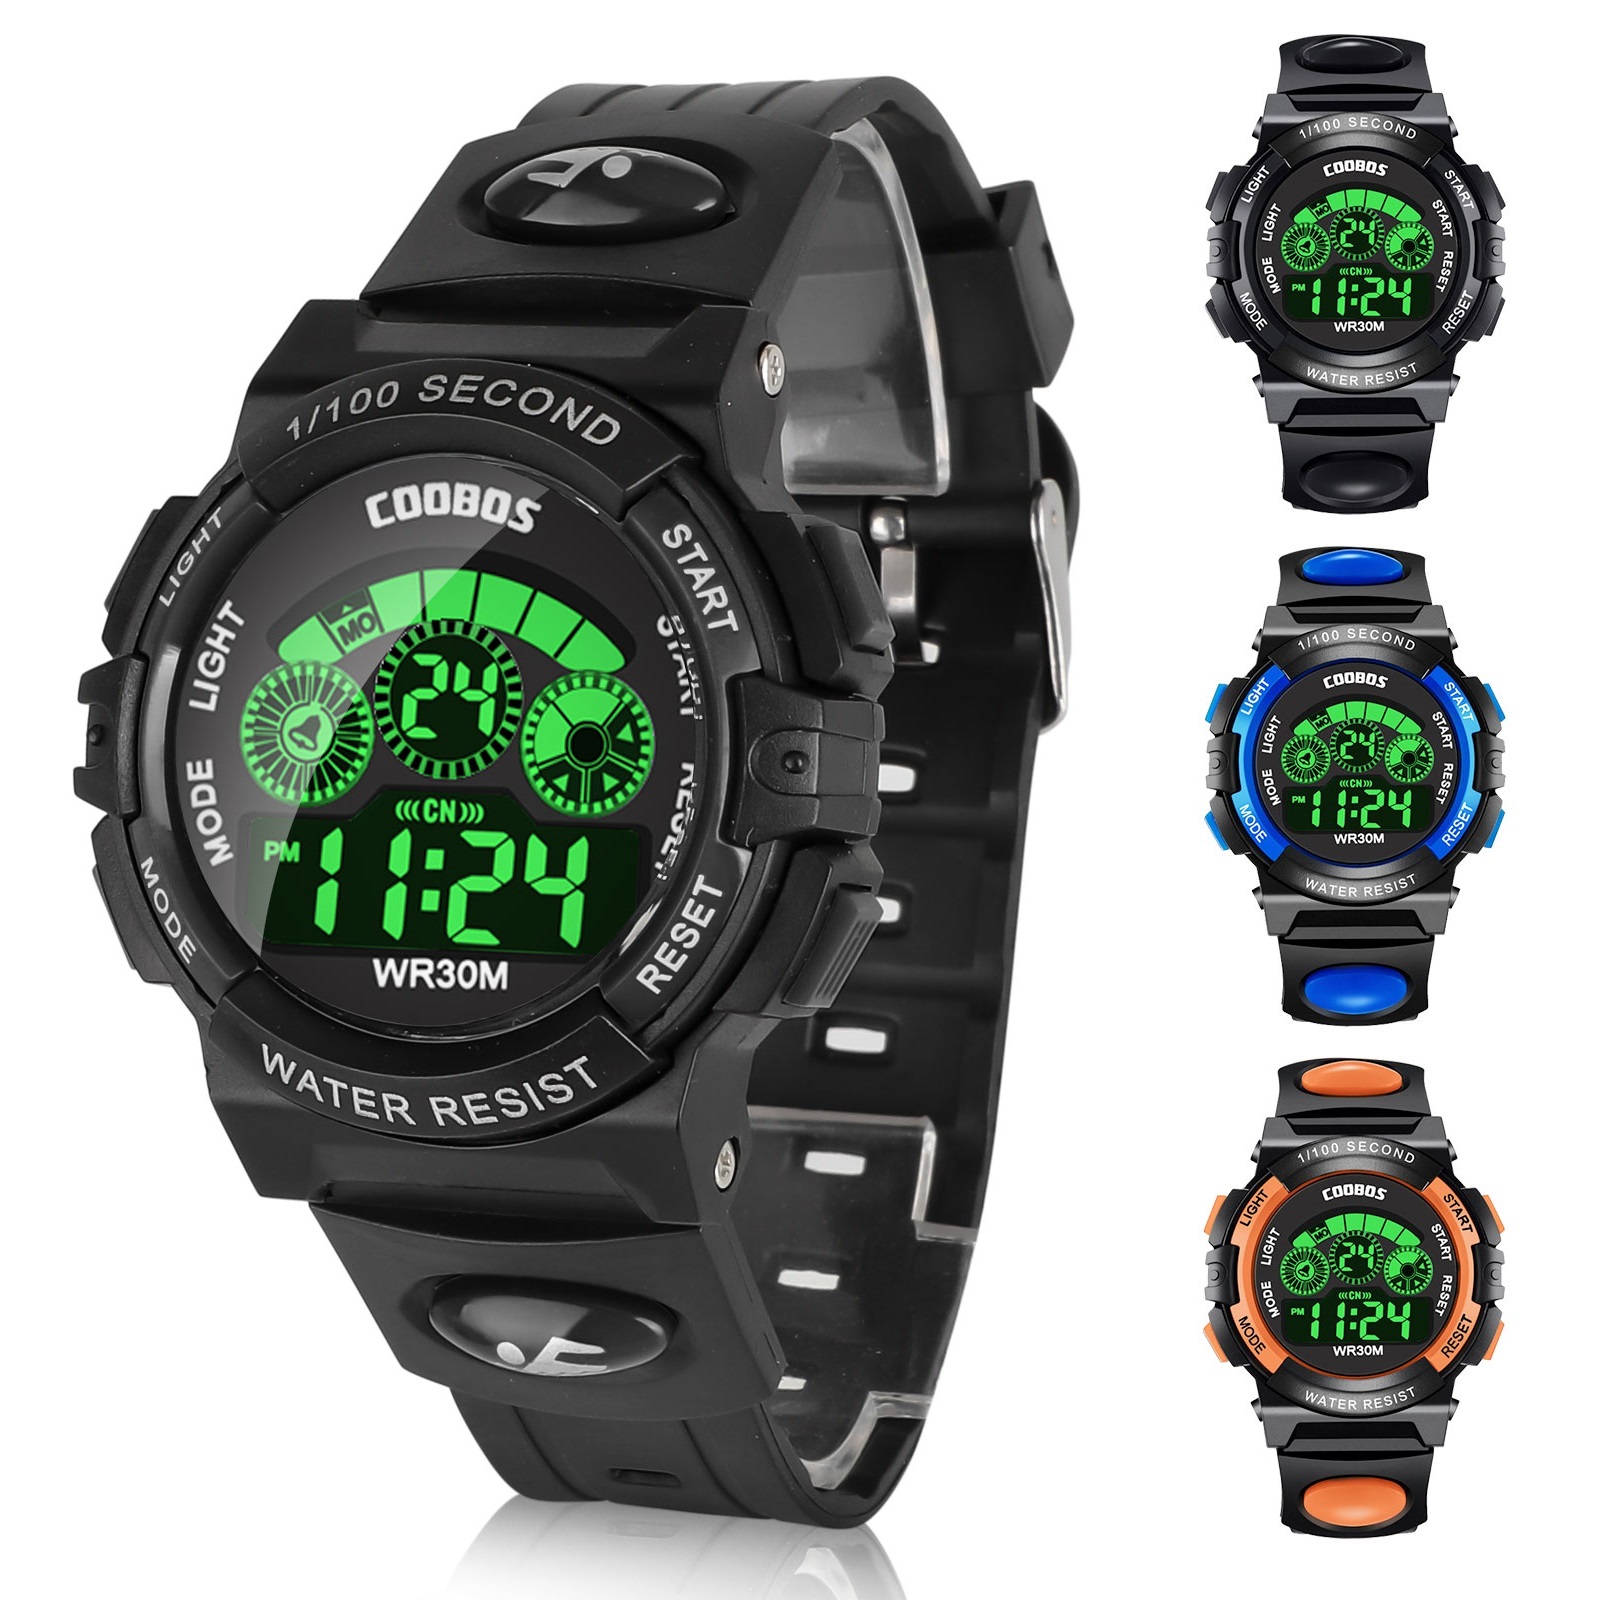 Kids Digital Watch, Boys Sports Waterproof Led Watches with Alarm,  Stopwatch, Multifunctional Outdoor Electronic Analog Quartz Wrist Watches  with Colorful LED Display, Gift for Boy Girls Children - Walmart.com